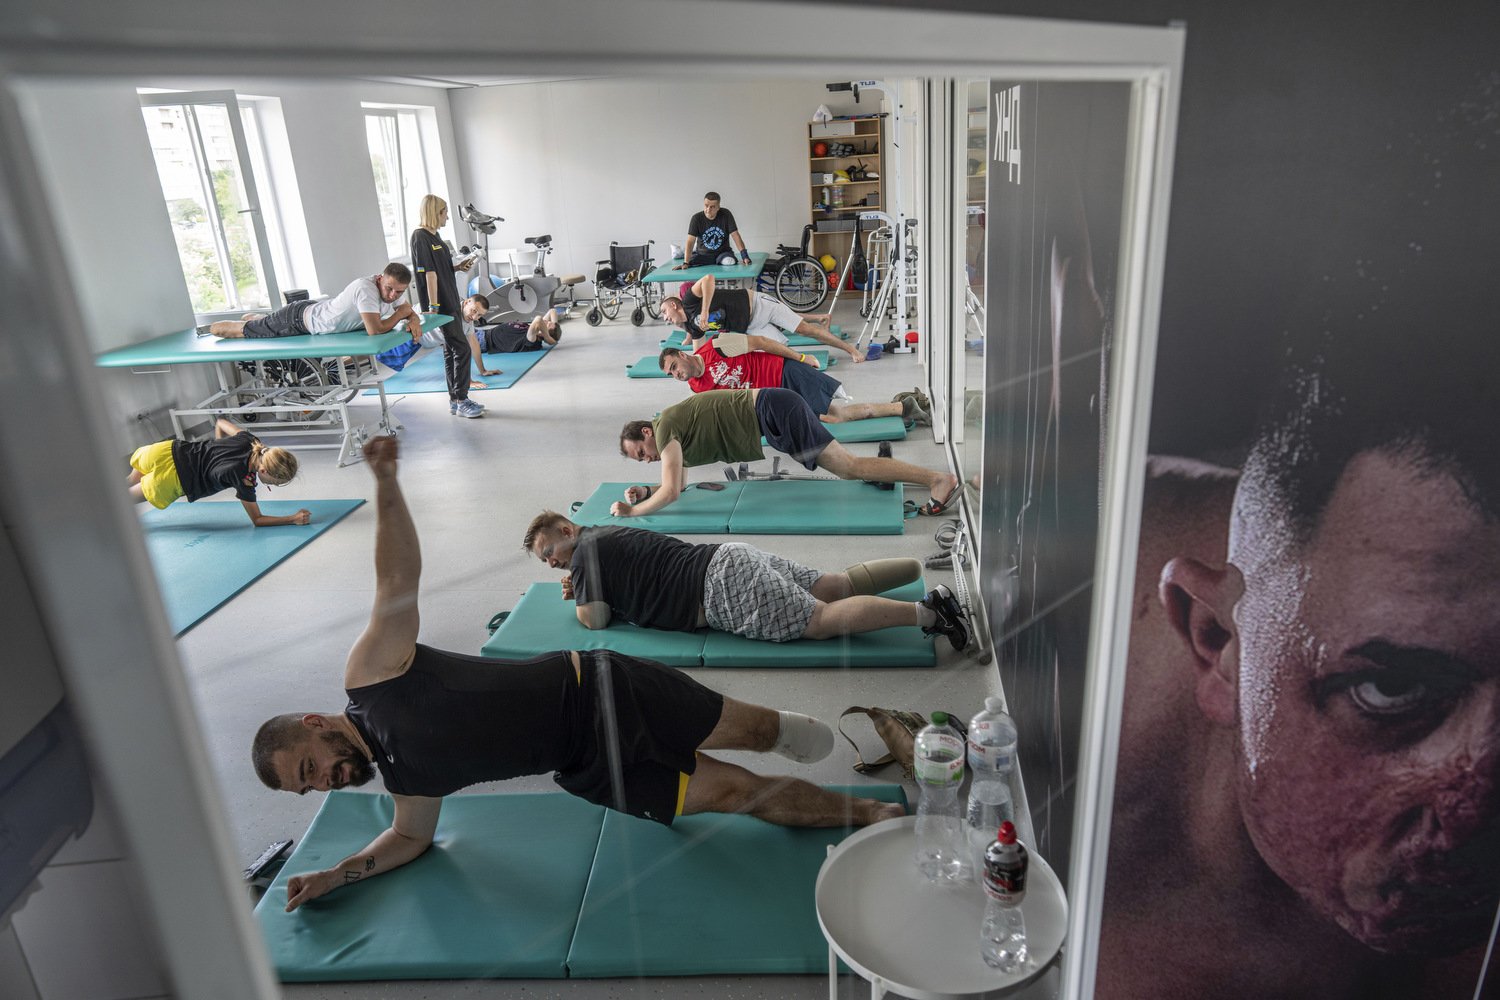  Ukrainian army veterans with amputated limbs take part in group rehabilitation exercises at the Unbroken rehabilitation center in Lviv, Ukraine, Monday, July 24, 2023. Ukraine is facing the prospect of a future with upwards of 20,000 amputees, many 